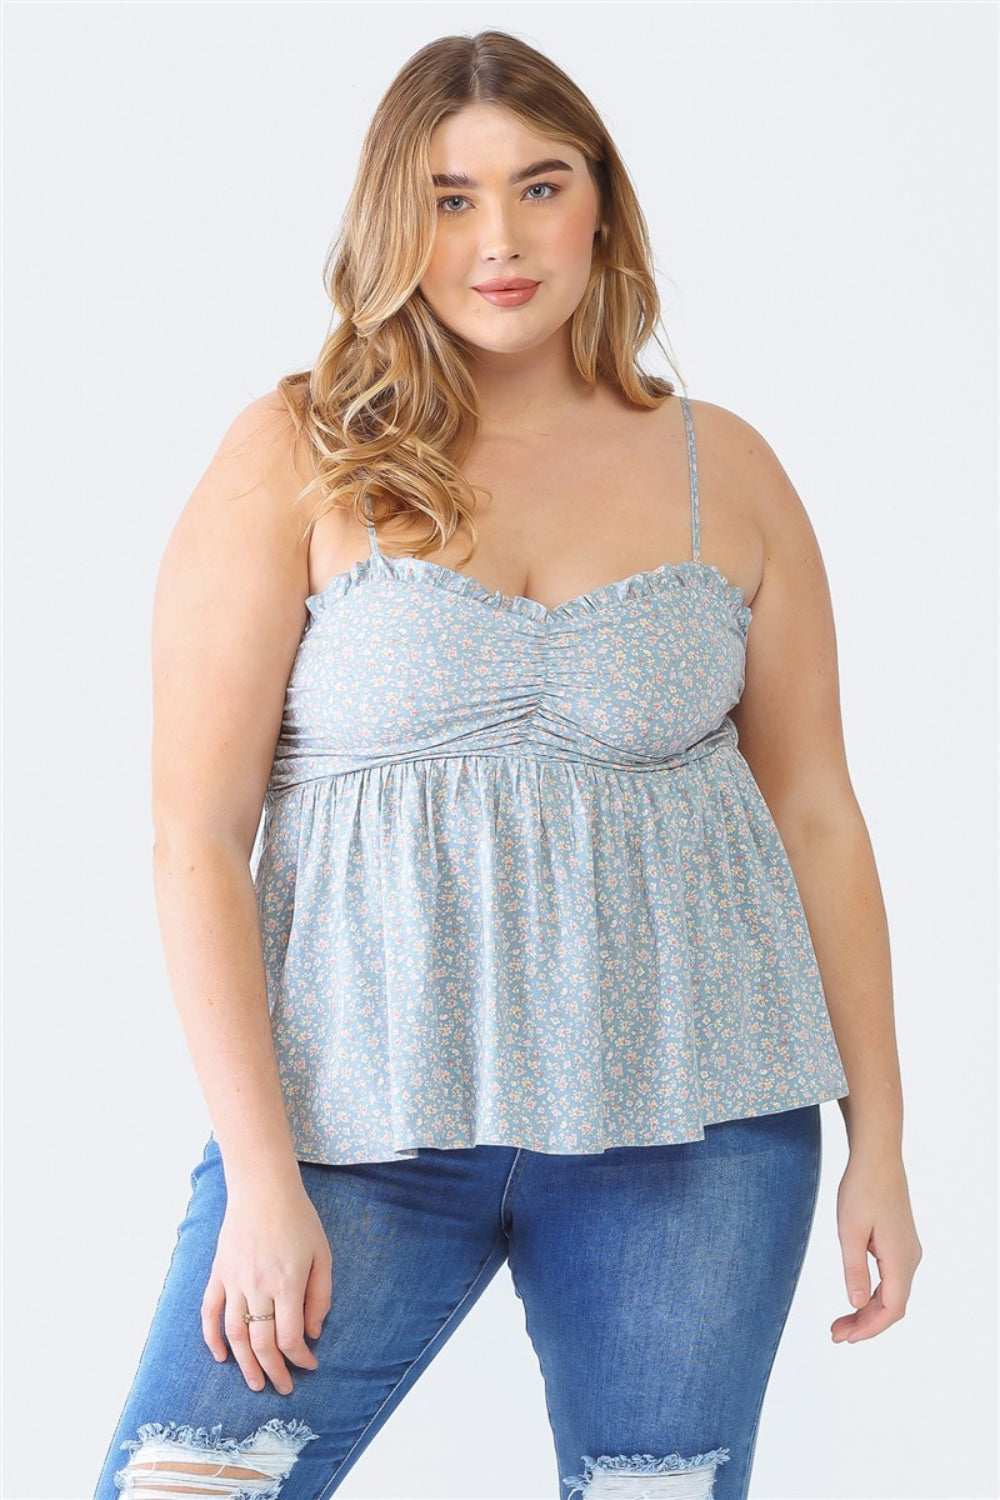 Zenobia Plus Size Frill Smocked Floral Sweetheart Neck Cami Blue